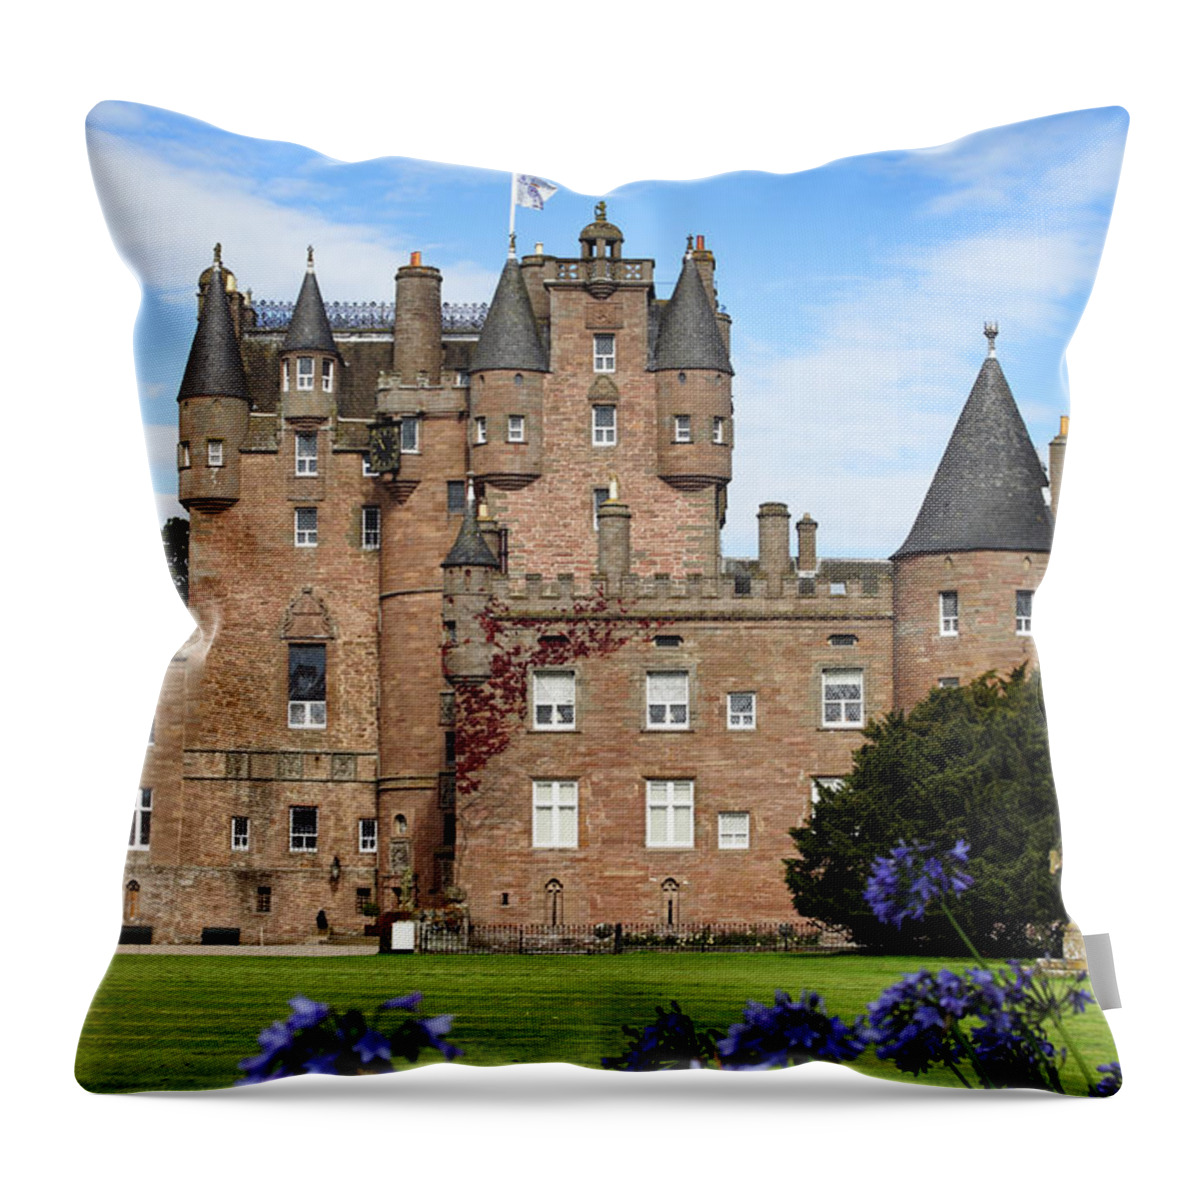 Scotland Throw Pillow featuring the photograph Glamis Castle by Jason Politte